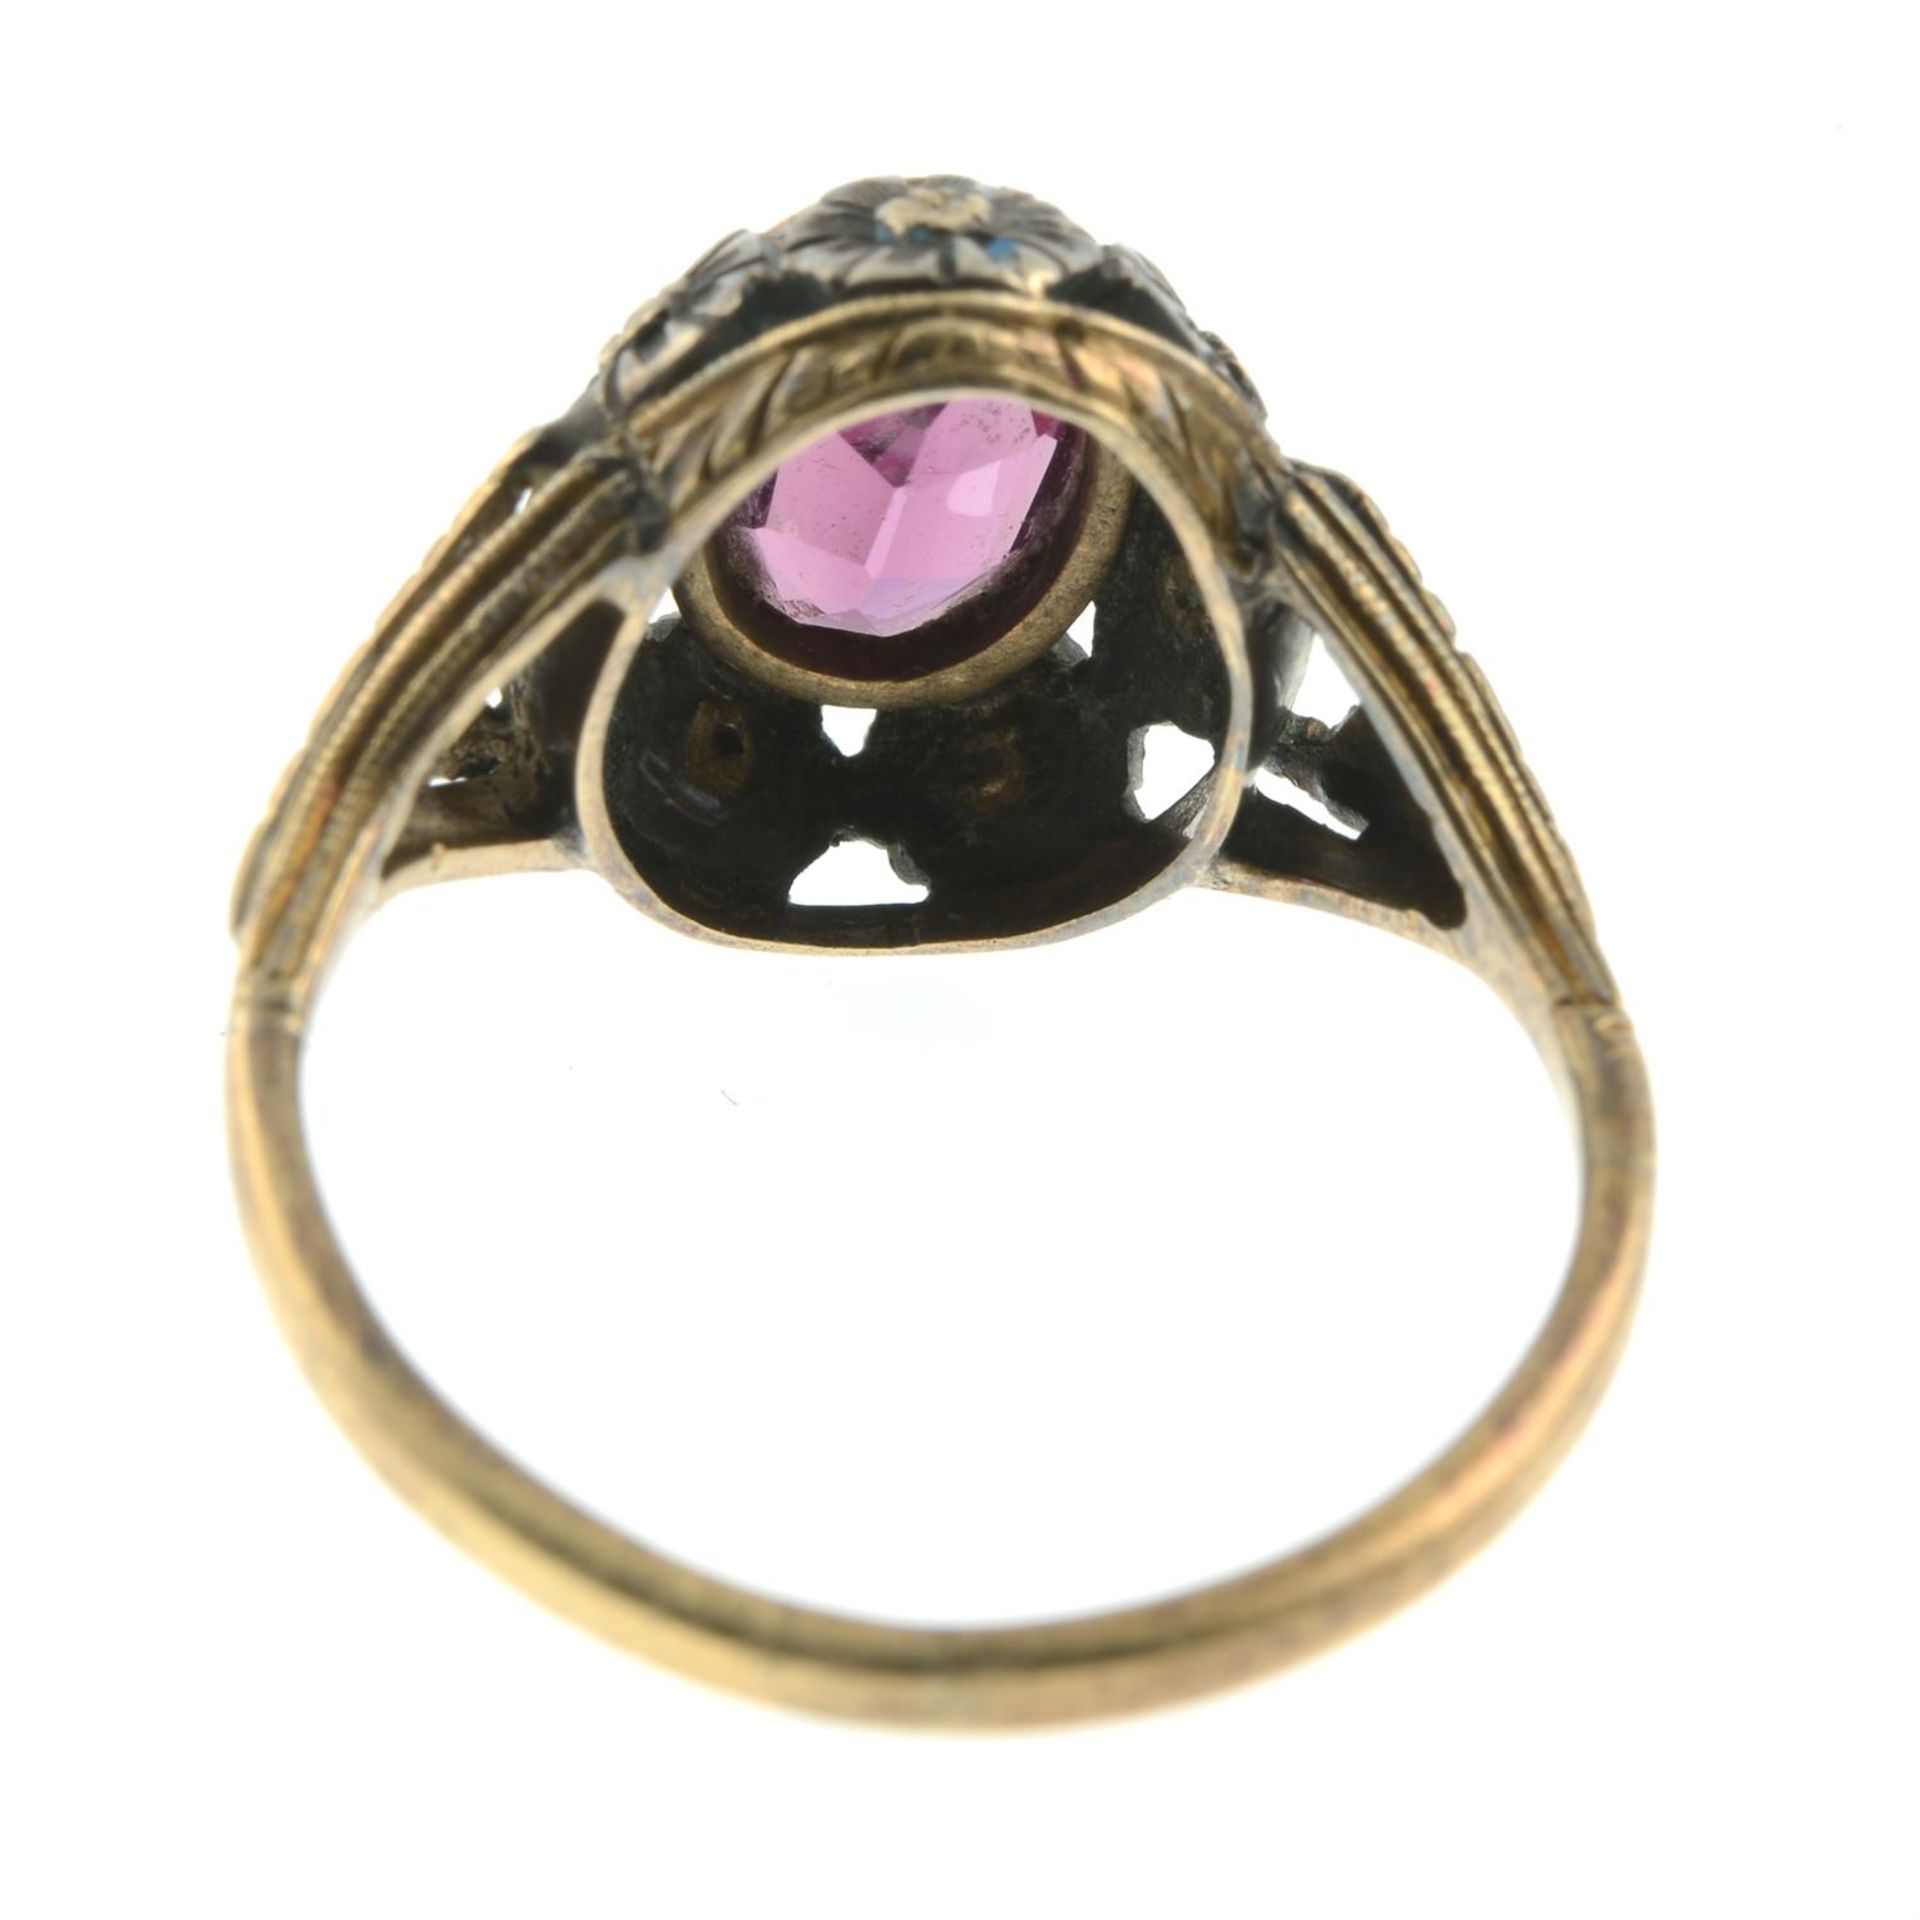 An early 20th century silver and 15ct gold garnet dress ring, with pierced floral surround. - Image 4 of 5